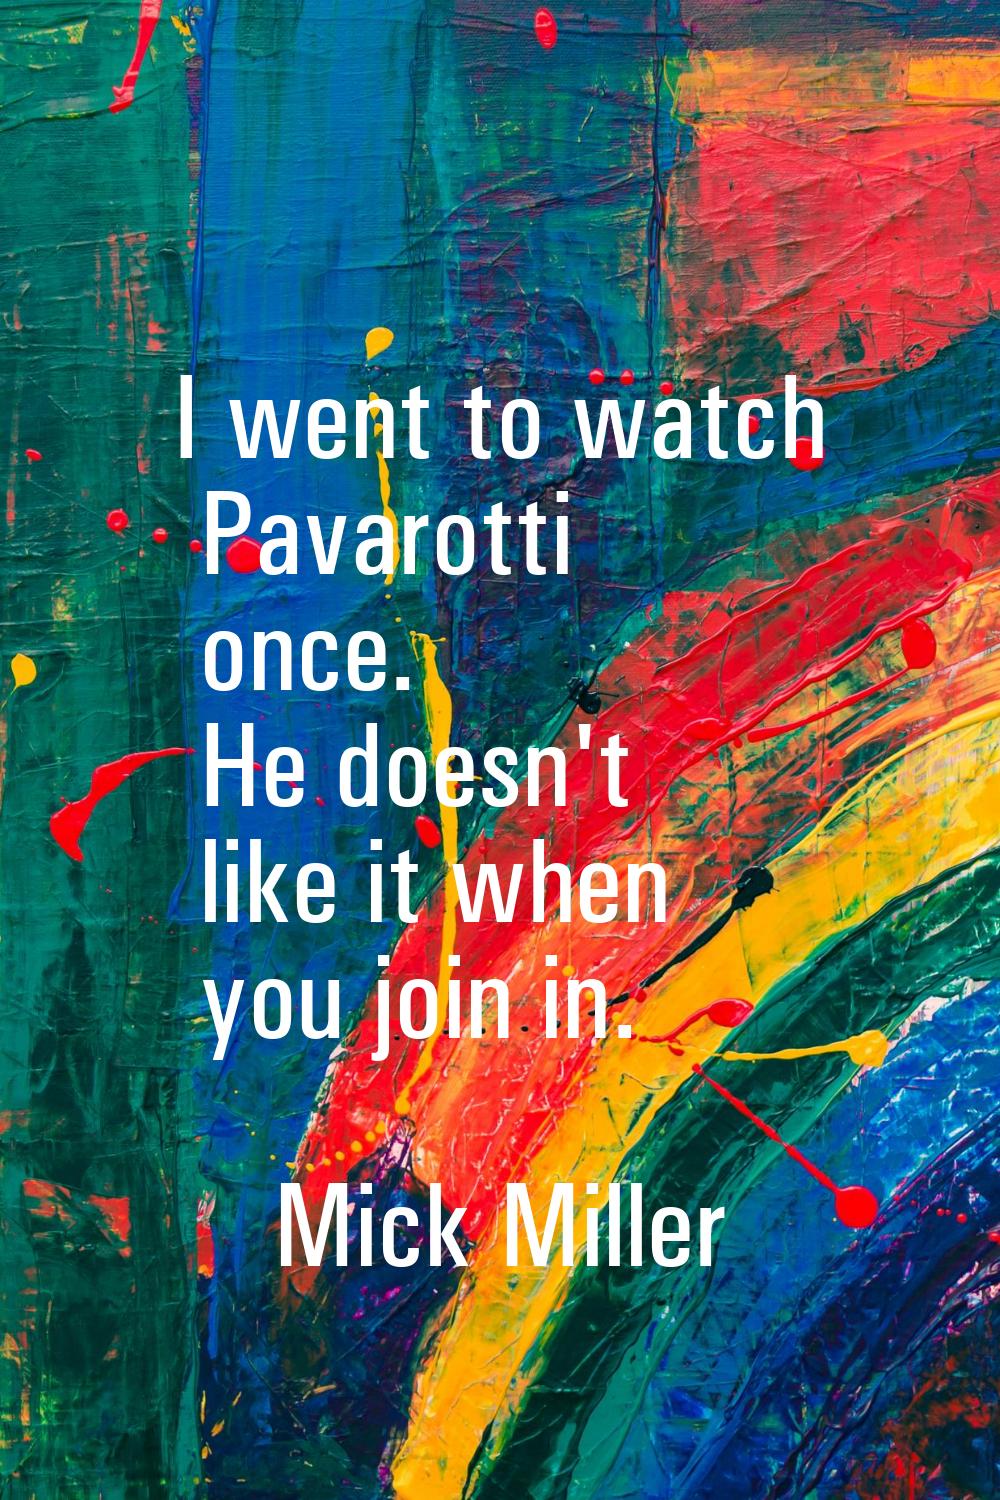 I went to watch Pavarotti once. He doesn't like it when you join in.